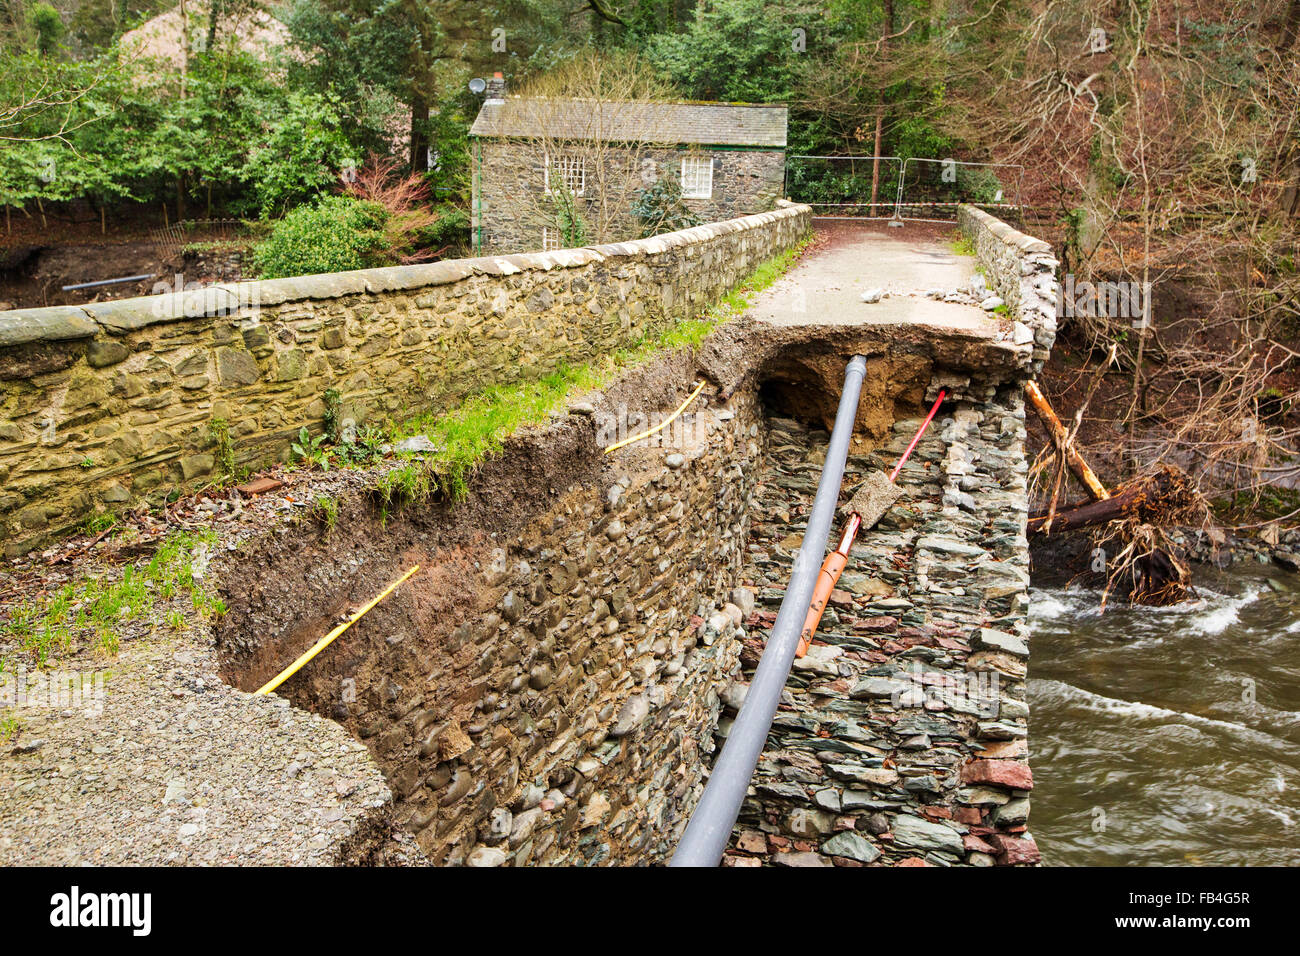 On Saturday 5th December 2015, Storm desmond crashed into the UK, producing the UK's highest ever 24 hour rainfall total at 341.4mm. It flooded many towns including Keswick. This shots shows Forge Lane bridge, an ancient stone bridge, severely damaged by the River Greta in flood. Stock Photo